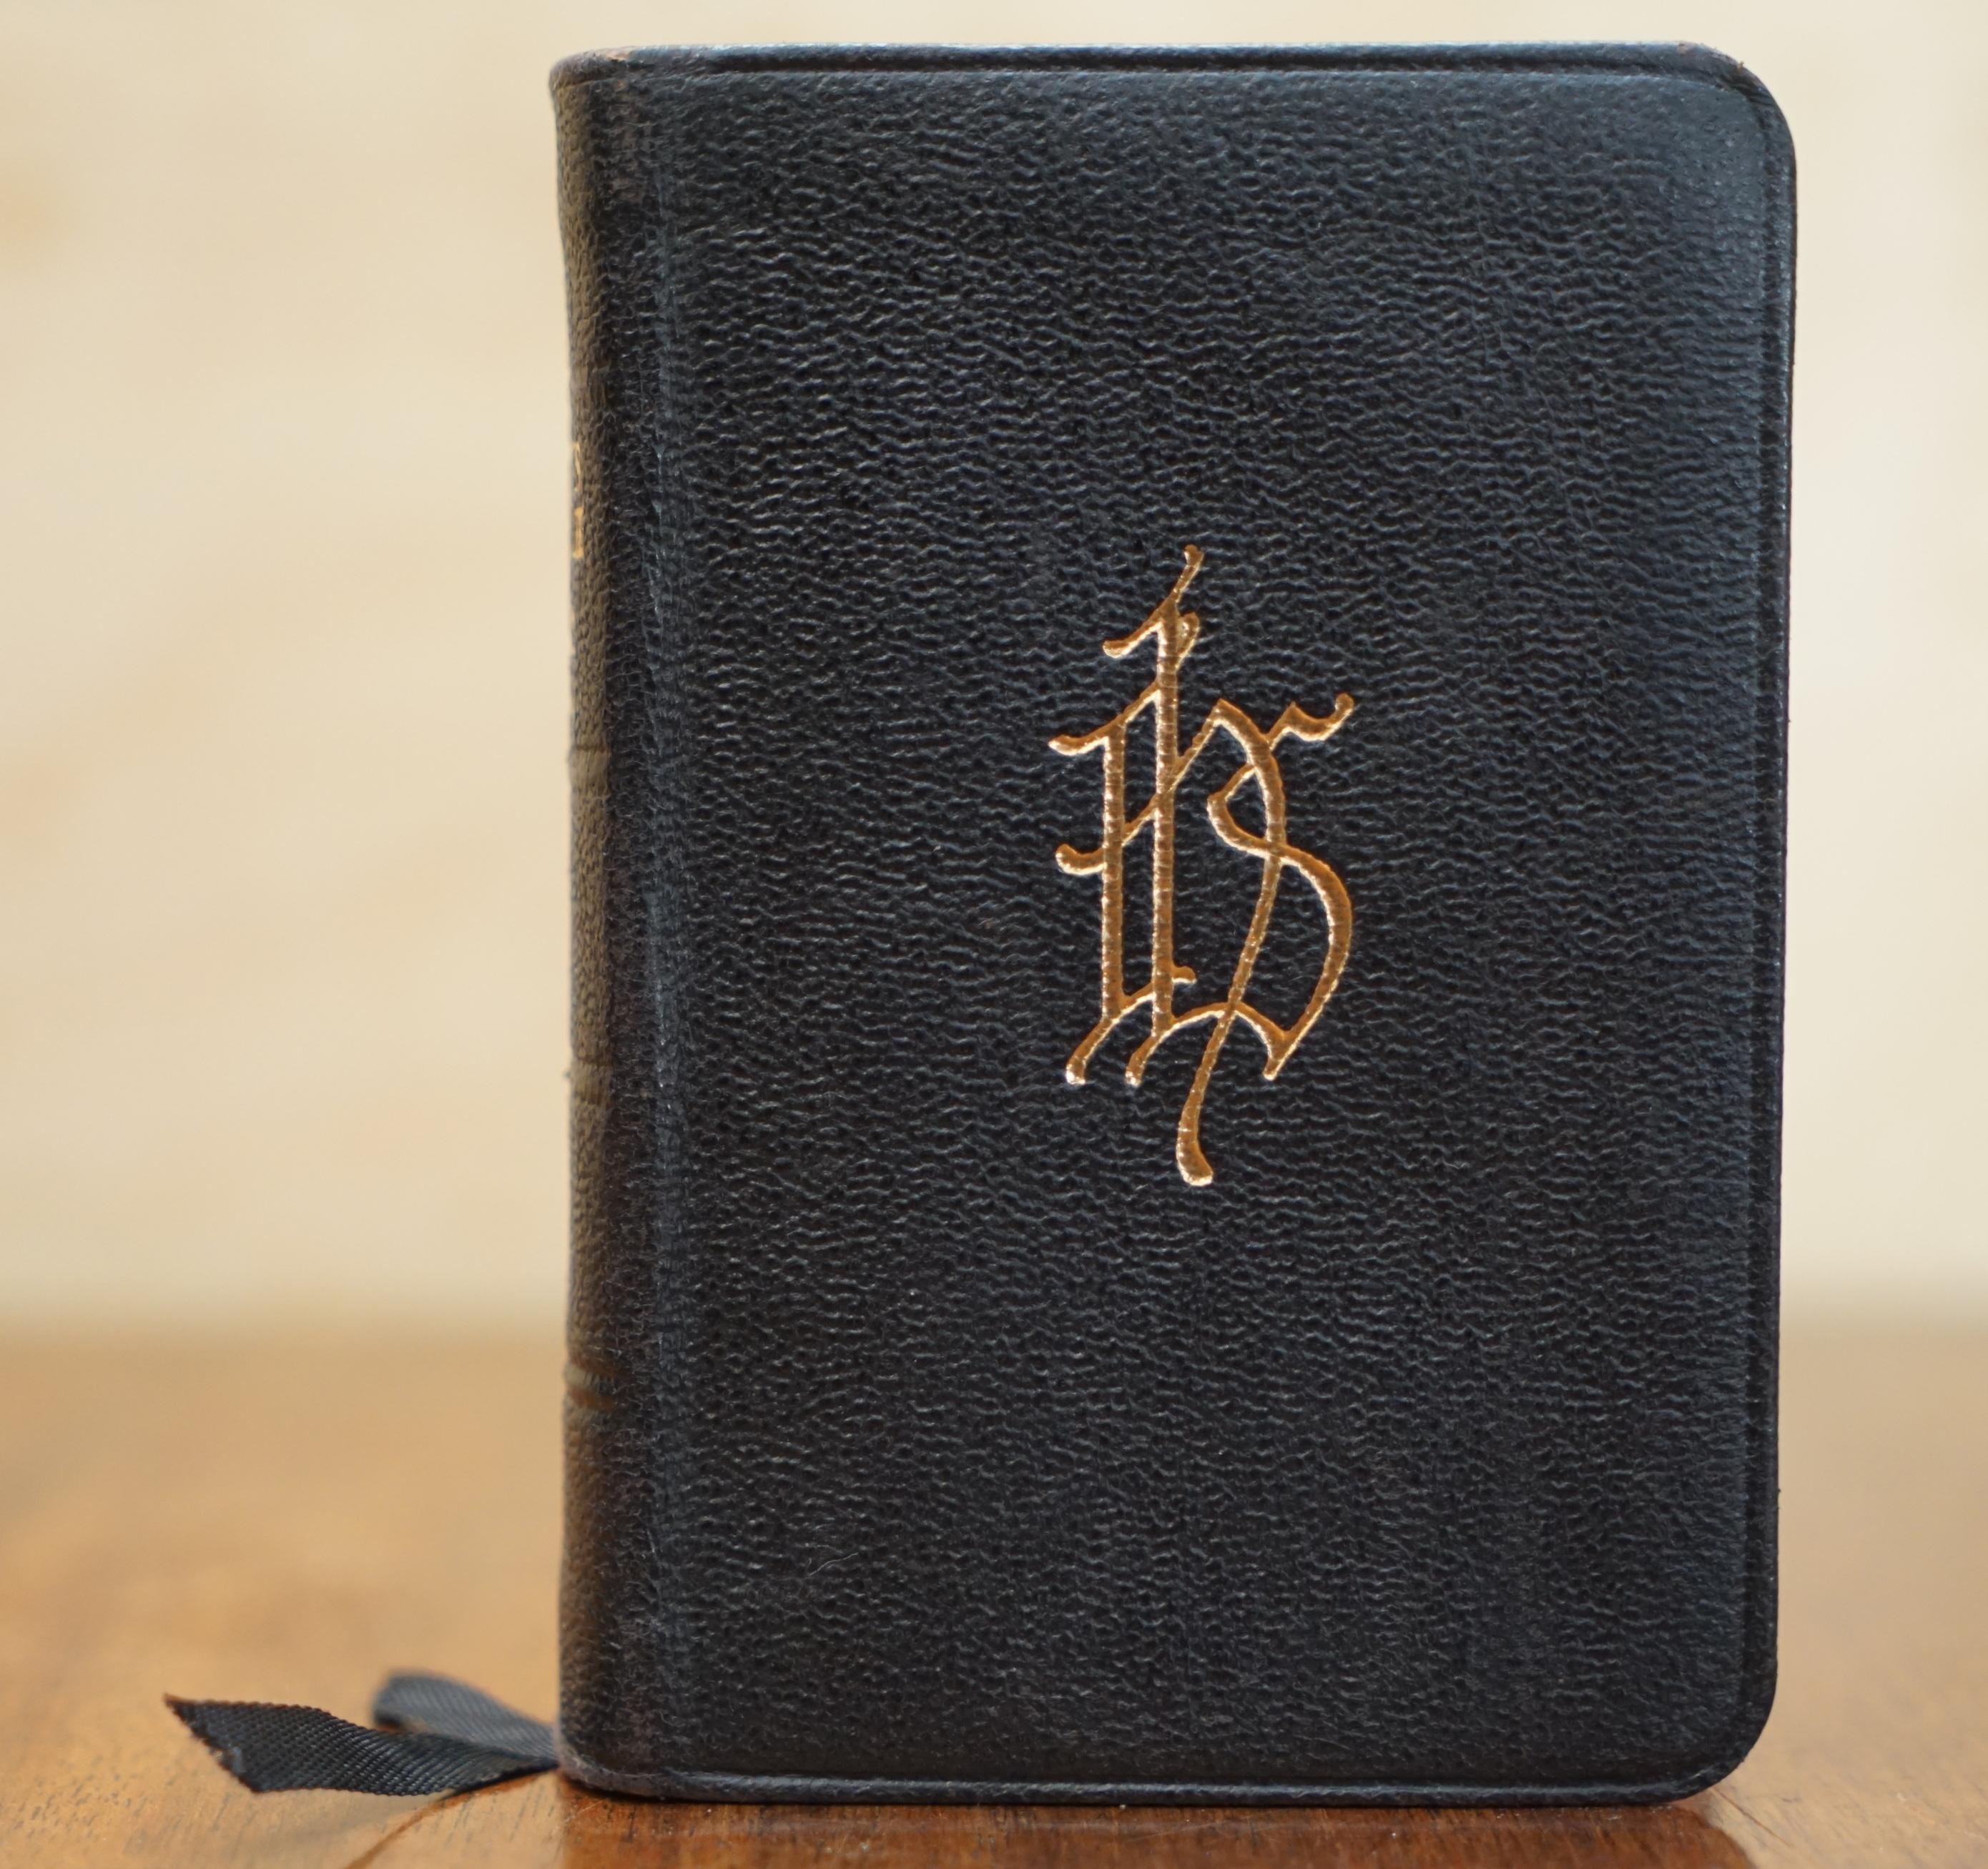 Royal House Antiques

Royal House Antiques is delighted to offer for sale this lovely small S Swithuns prayer book English Hymnal

A good looking and collectable little travel book, it would make a great curio present

Dimensions

Height:-